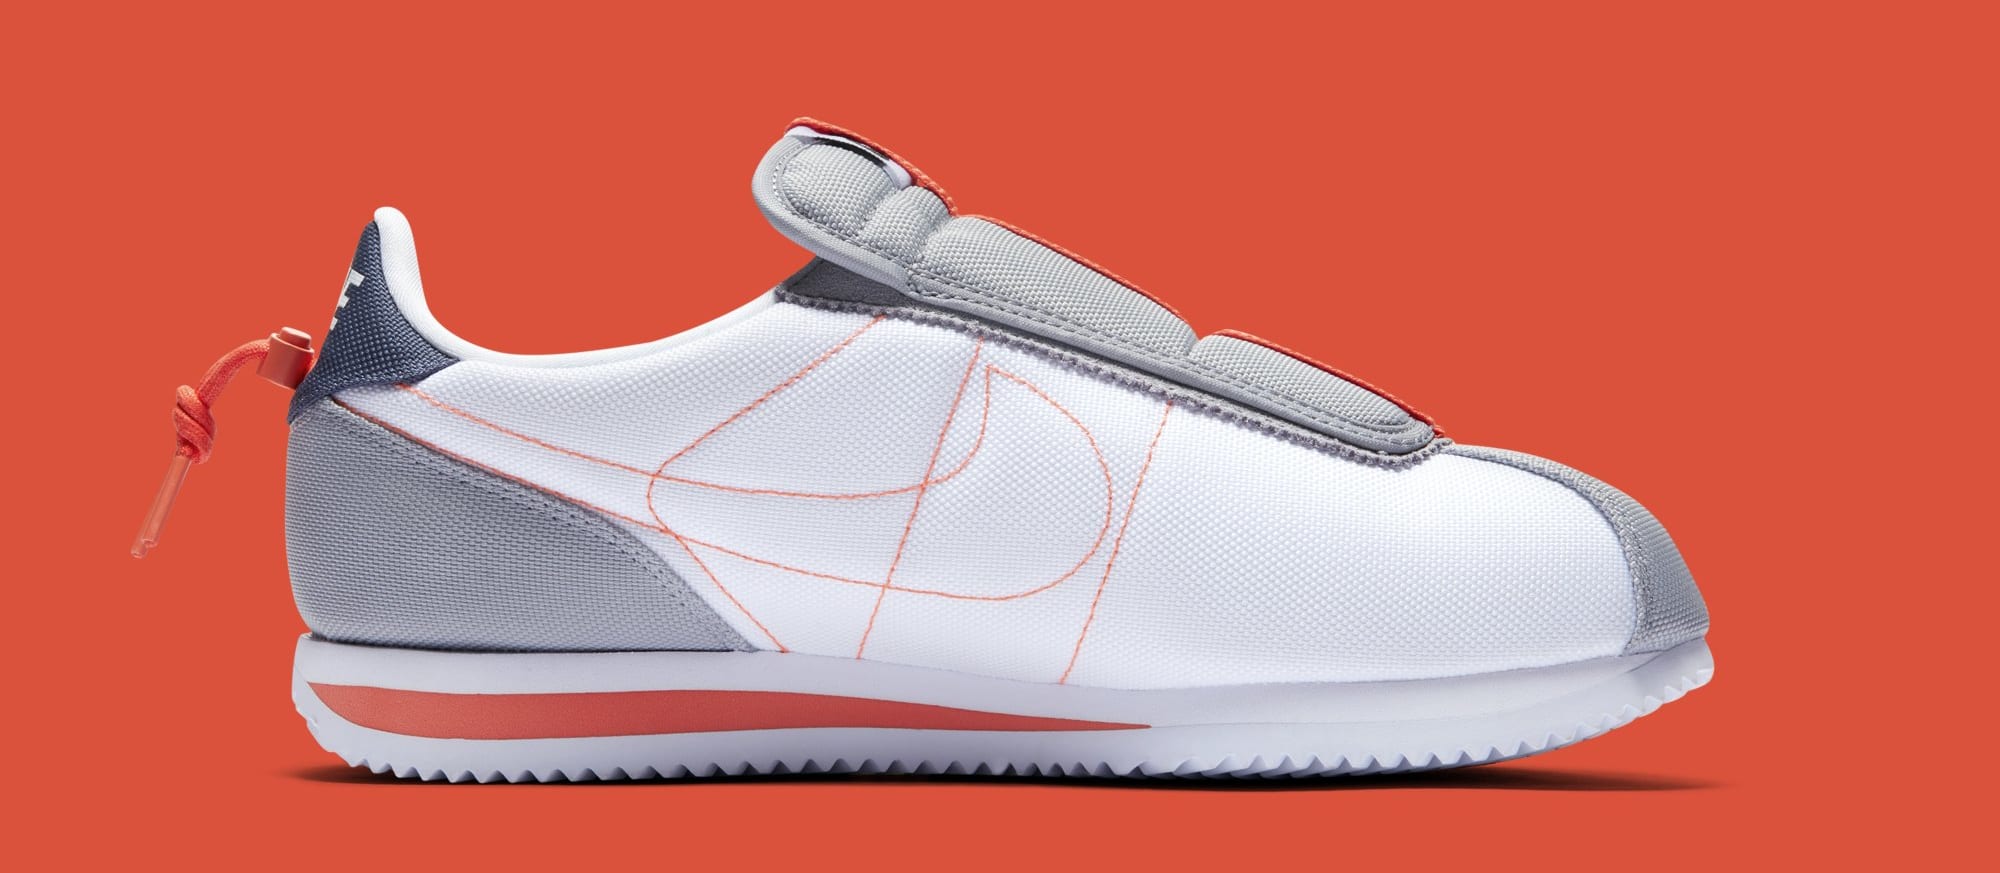 Nike Officially Reveals Kendrick Lamar's Fourth Cortez Collab